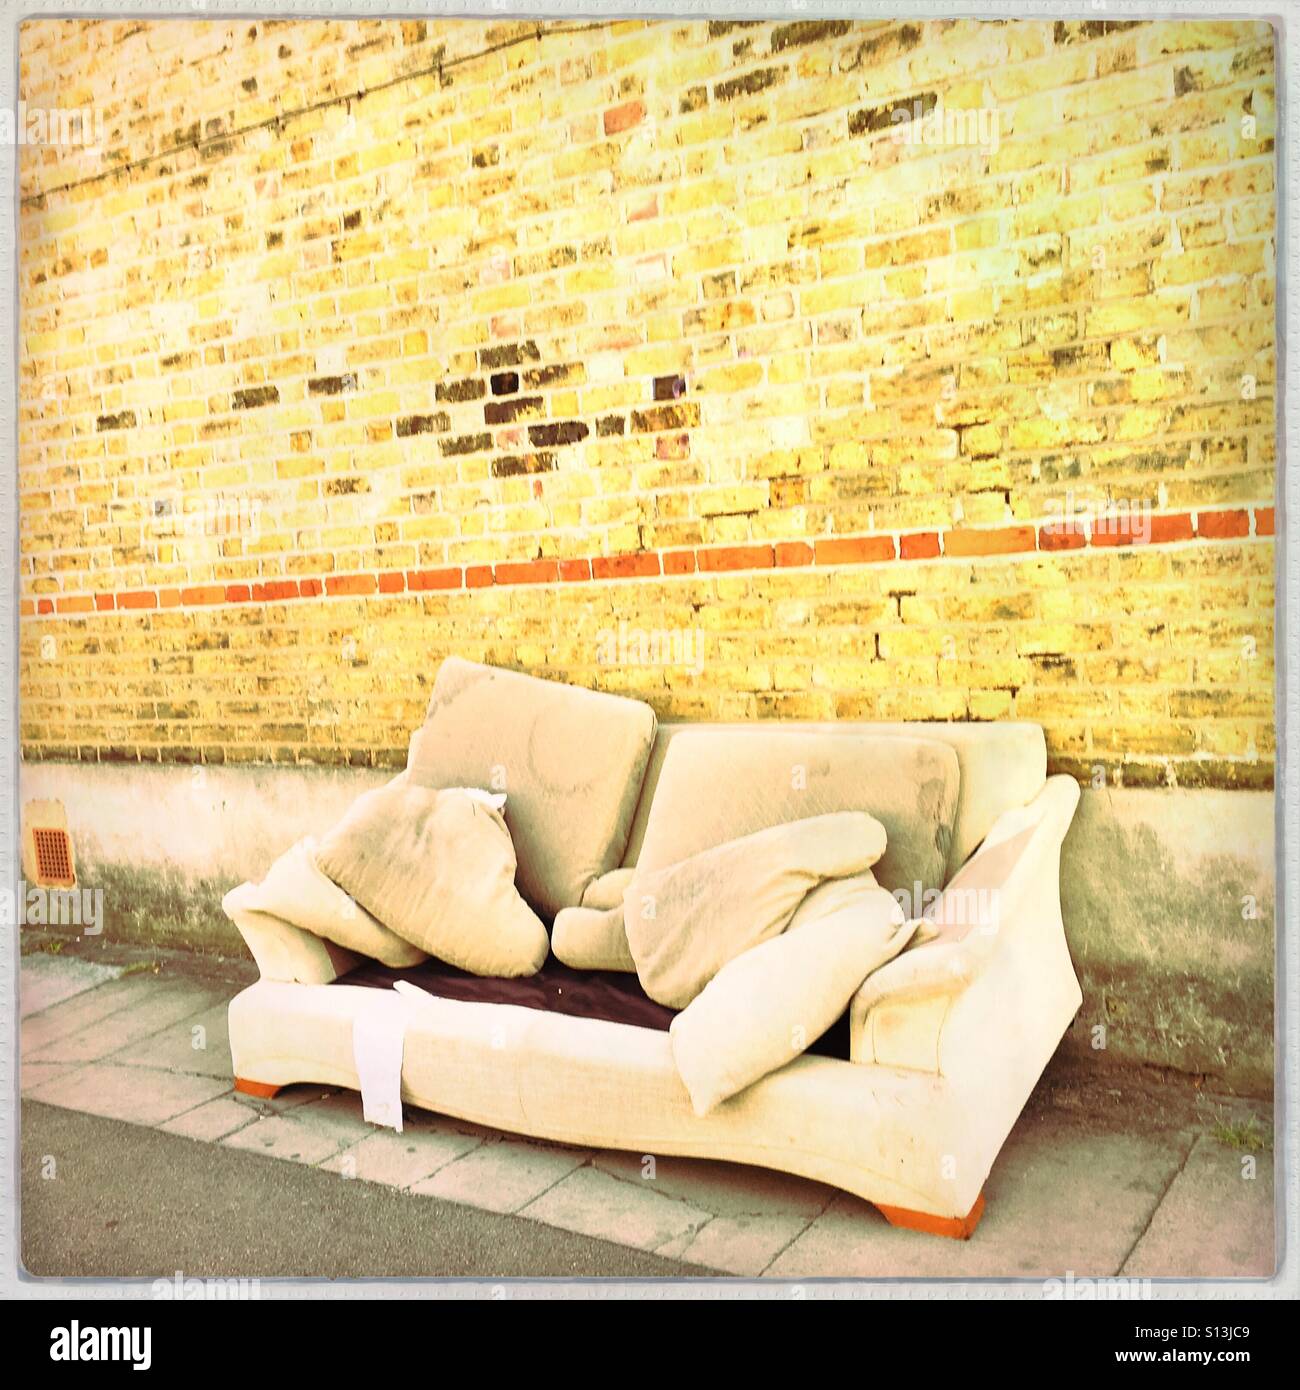 Sofa dumped by a wall Stock Photo